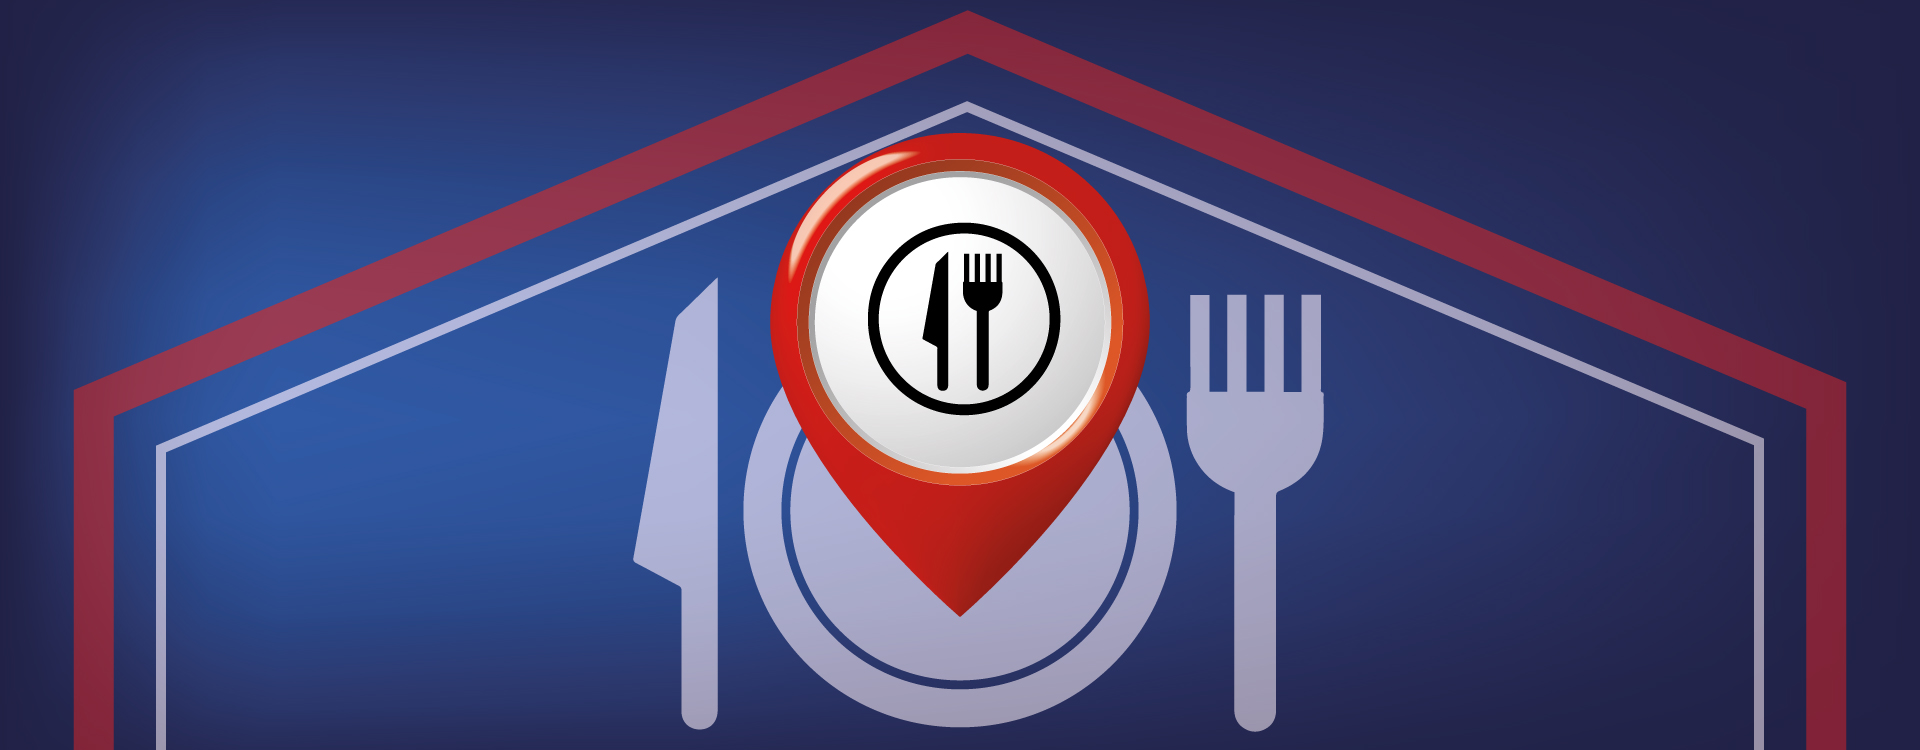 Choosing the perfect Restaurant Location for your business